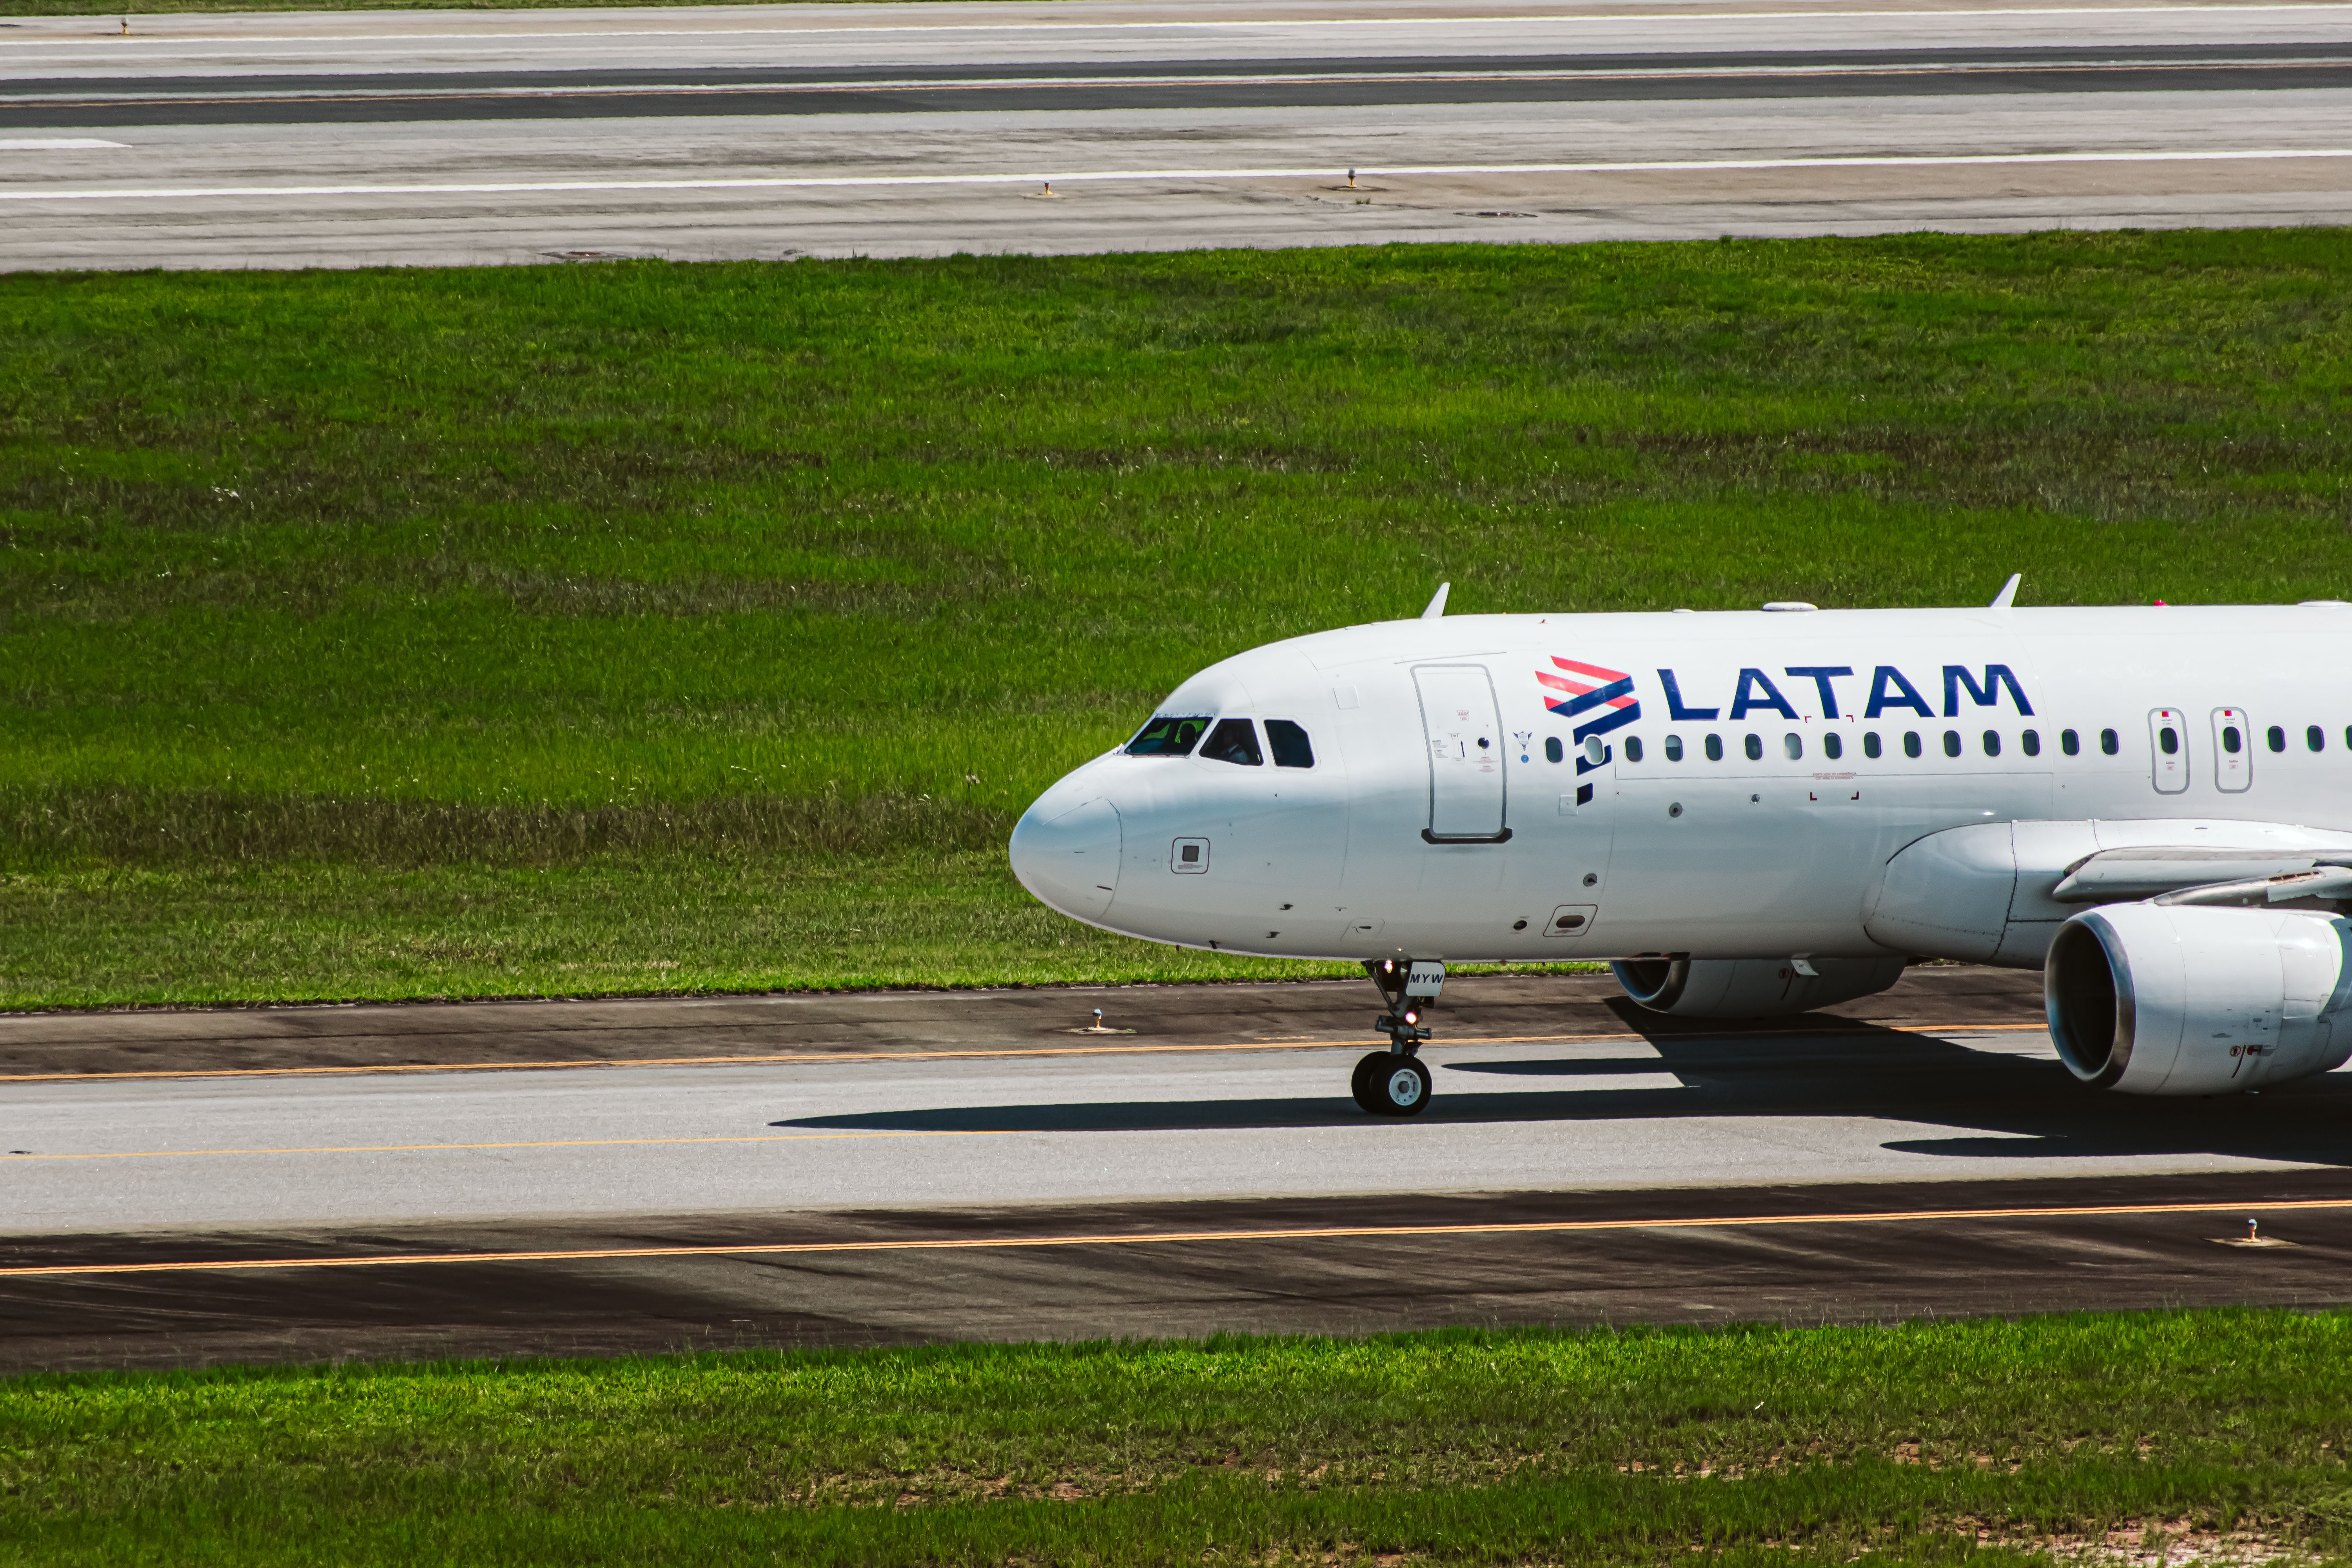 A LATAM Airlines aircraft in Sao Paulo Guarulhos